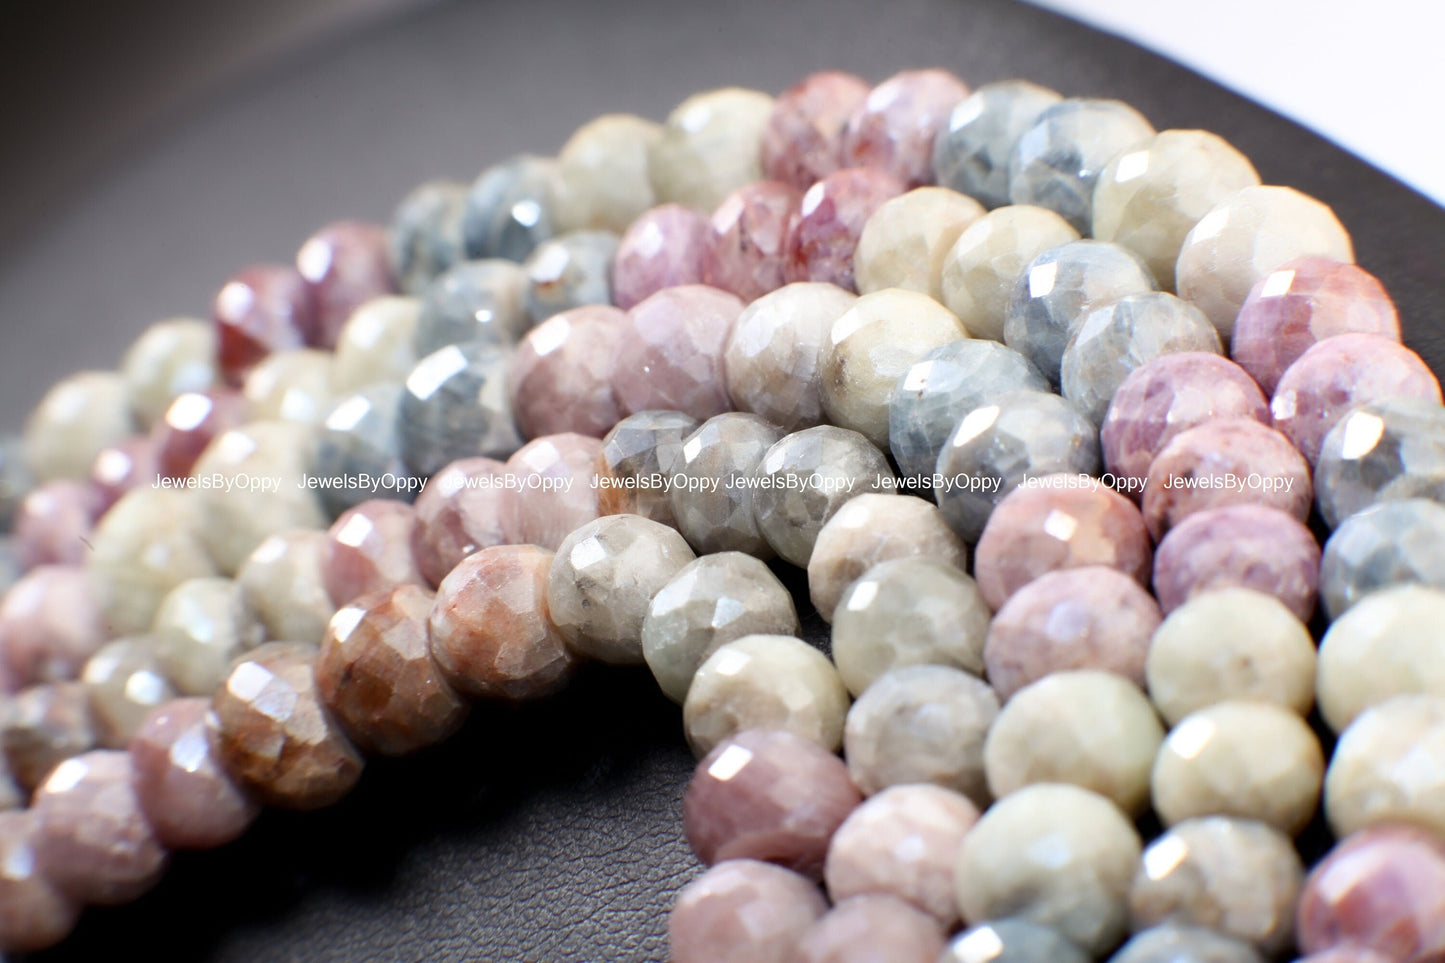 Natural Multi Pink Silverite Sapphire Faceted Rondelle 6.5-8mm, Rare , heavy weight , Jewelry Making Gemstone Beads 3&quot;,6&quot;,13&quot; Strand